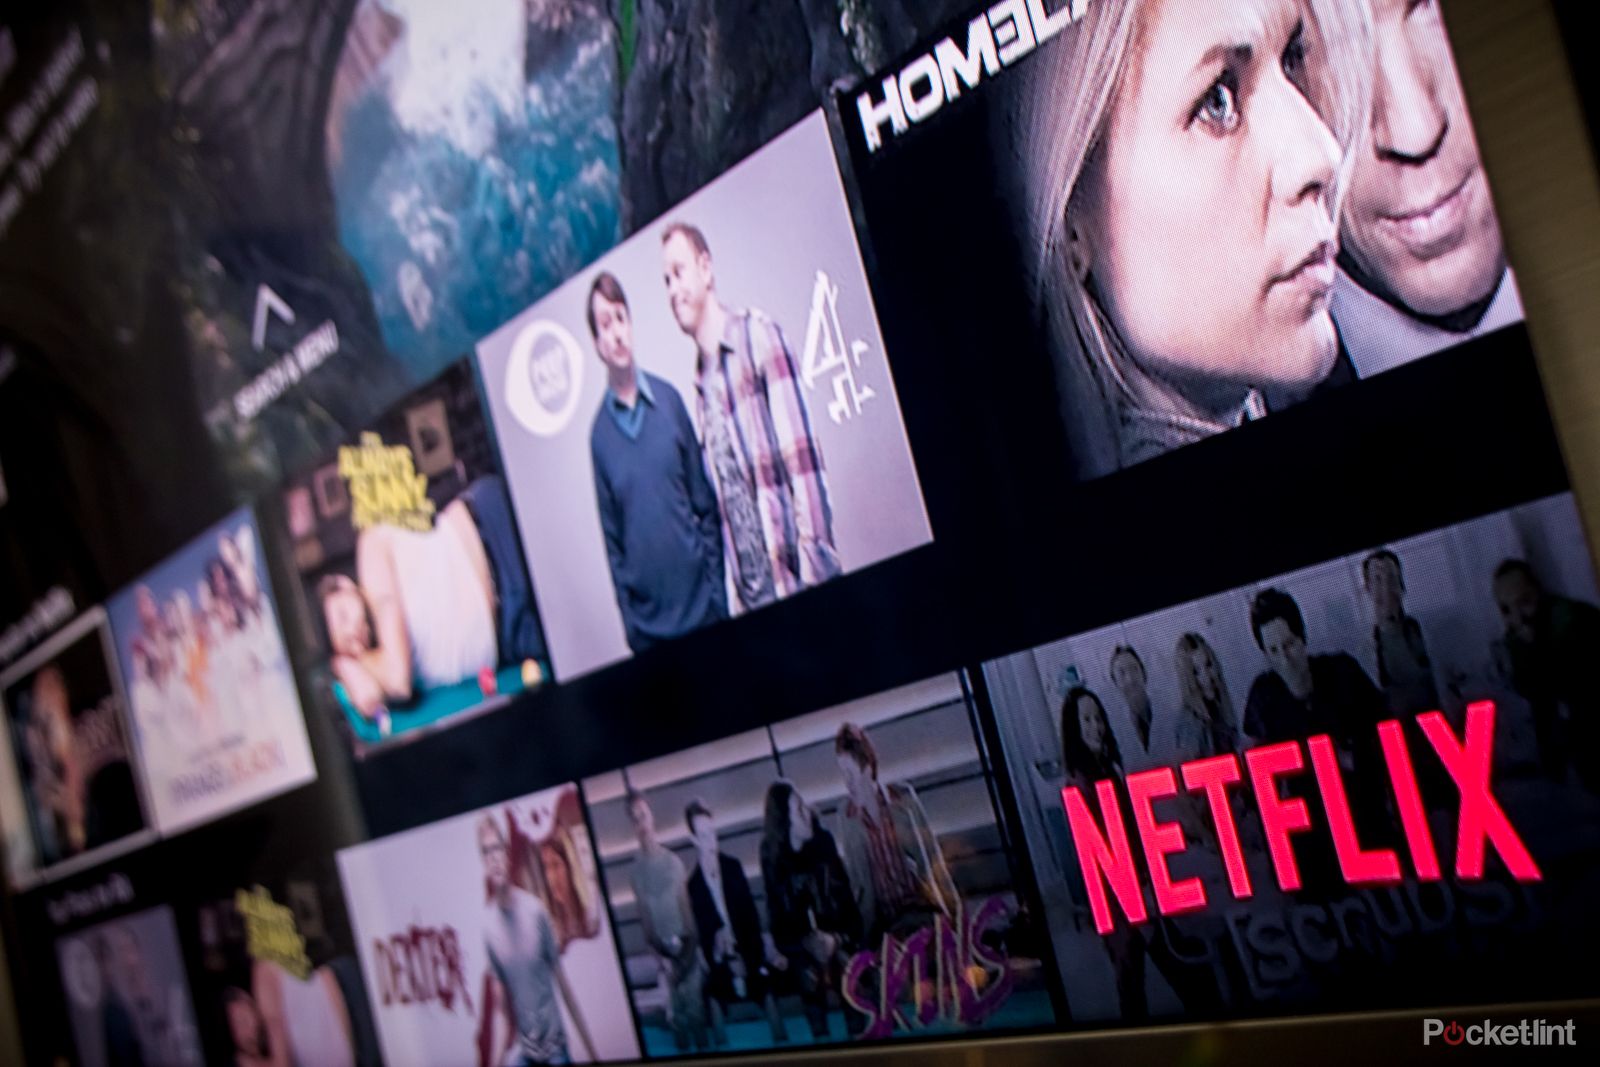 virgin media tivo users get significantly better netflix experience image 1